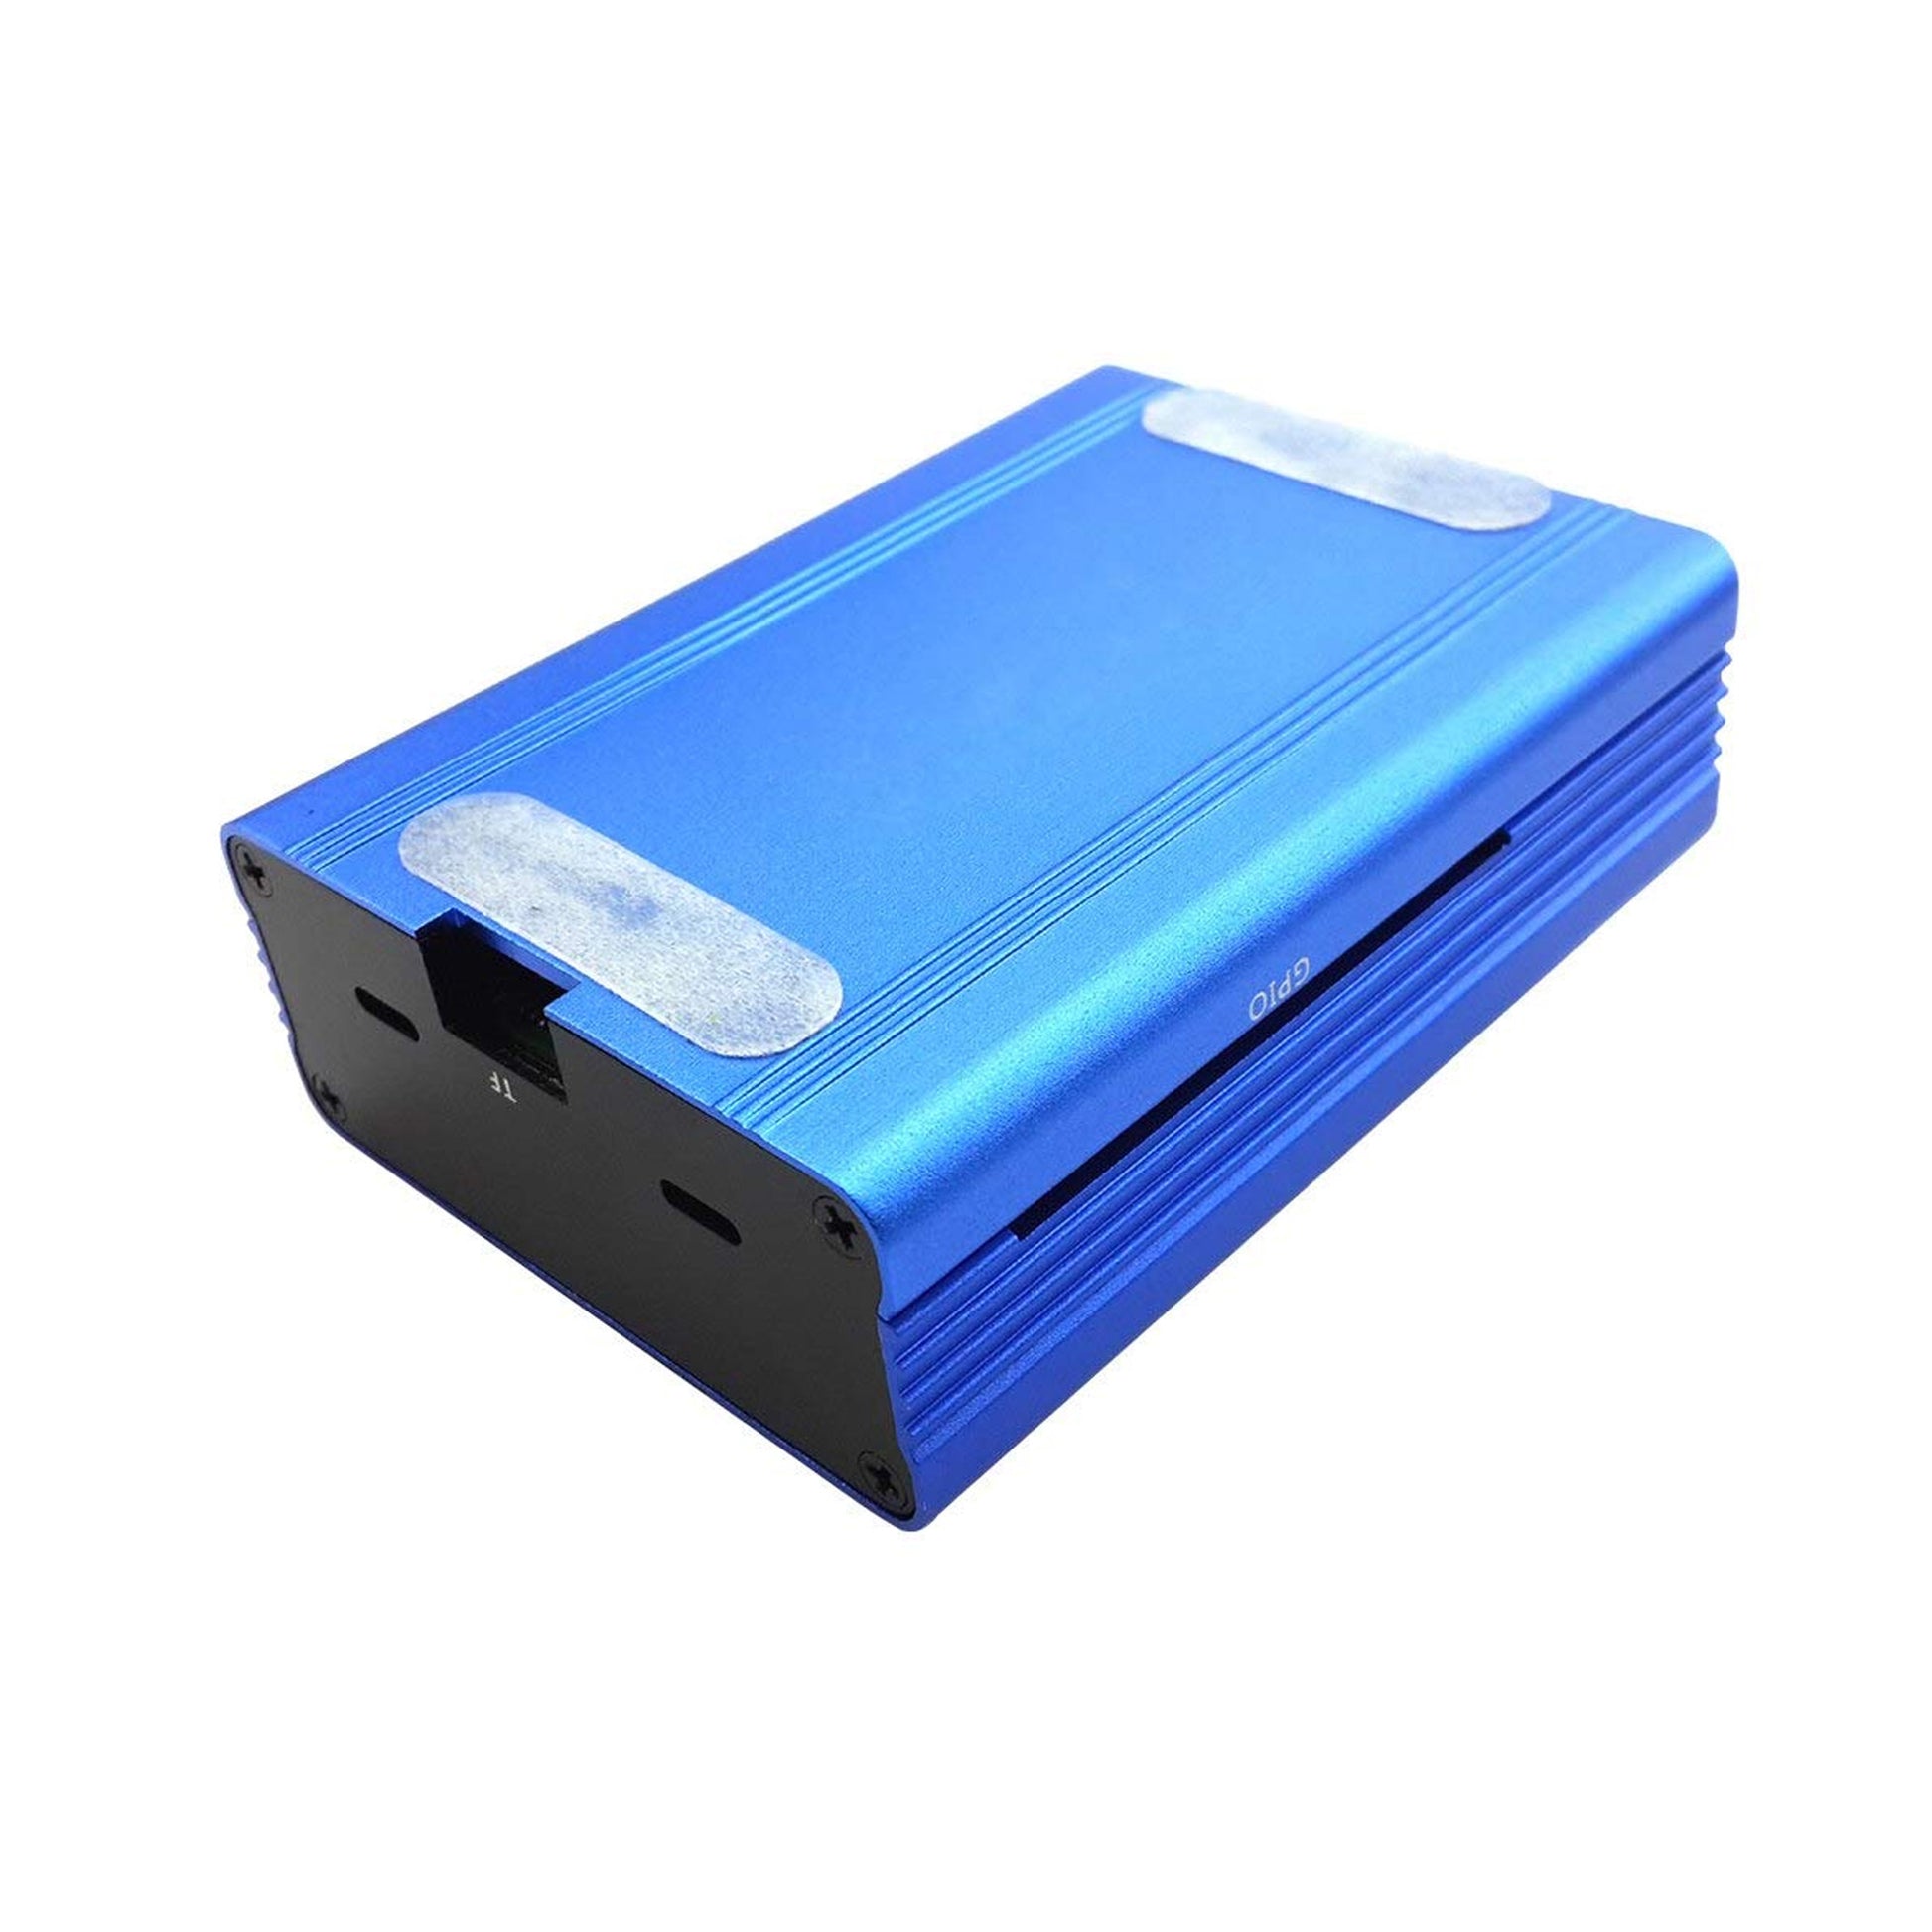 Raspberry Pi 4 Metal Case, Raspberry Pi 4 Model B Aluminum Alloy Case with Cooling Fan - Blue - RS2640 - REES52